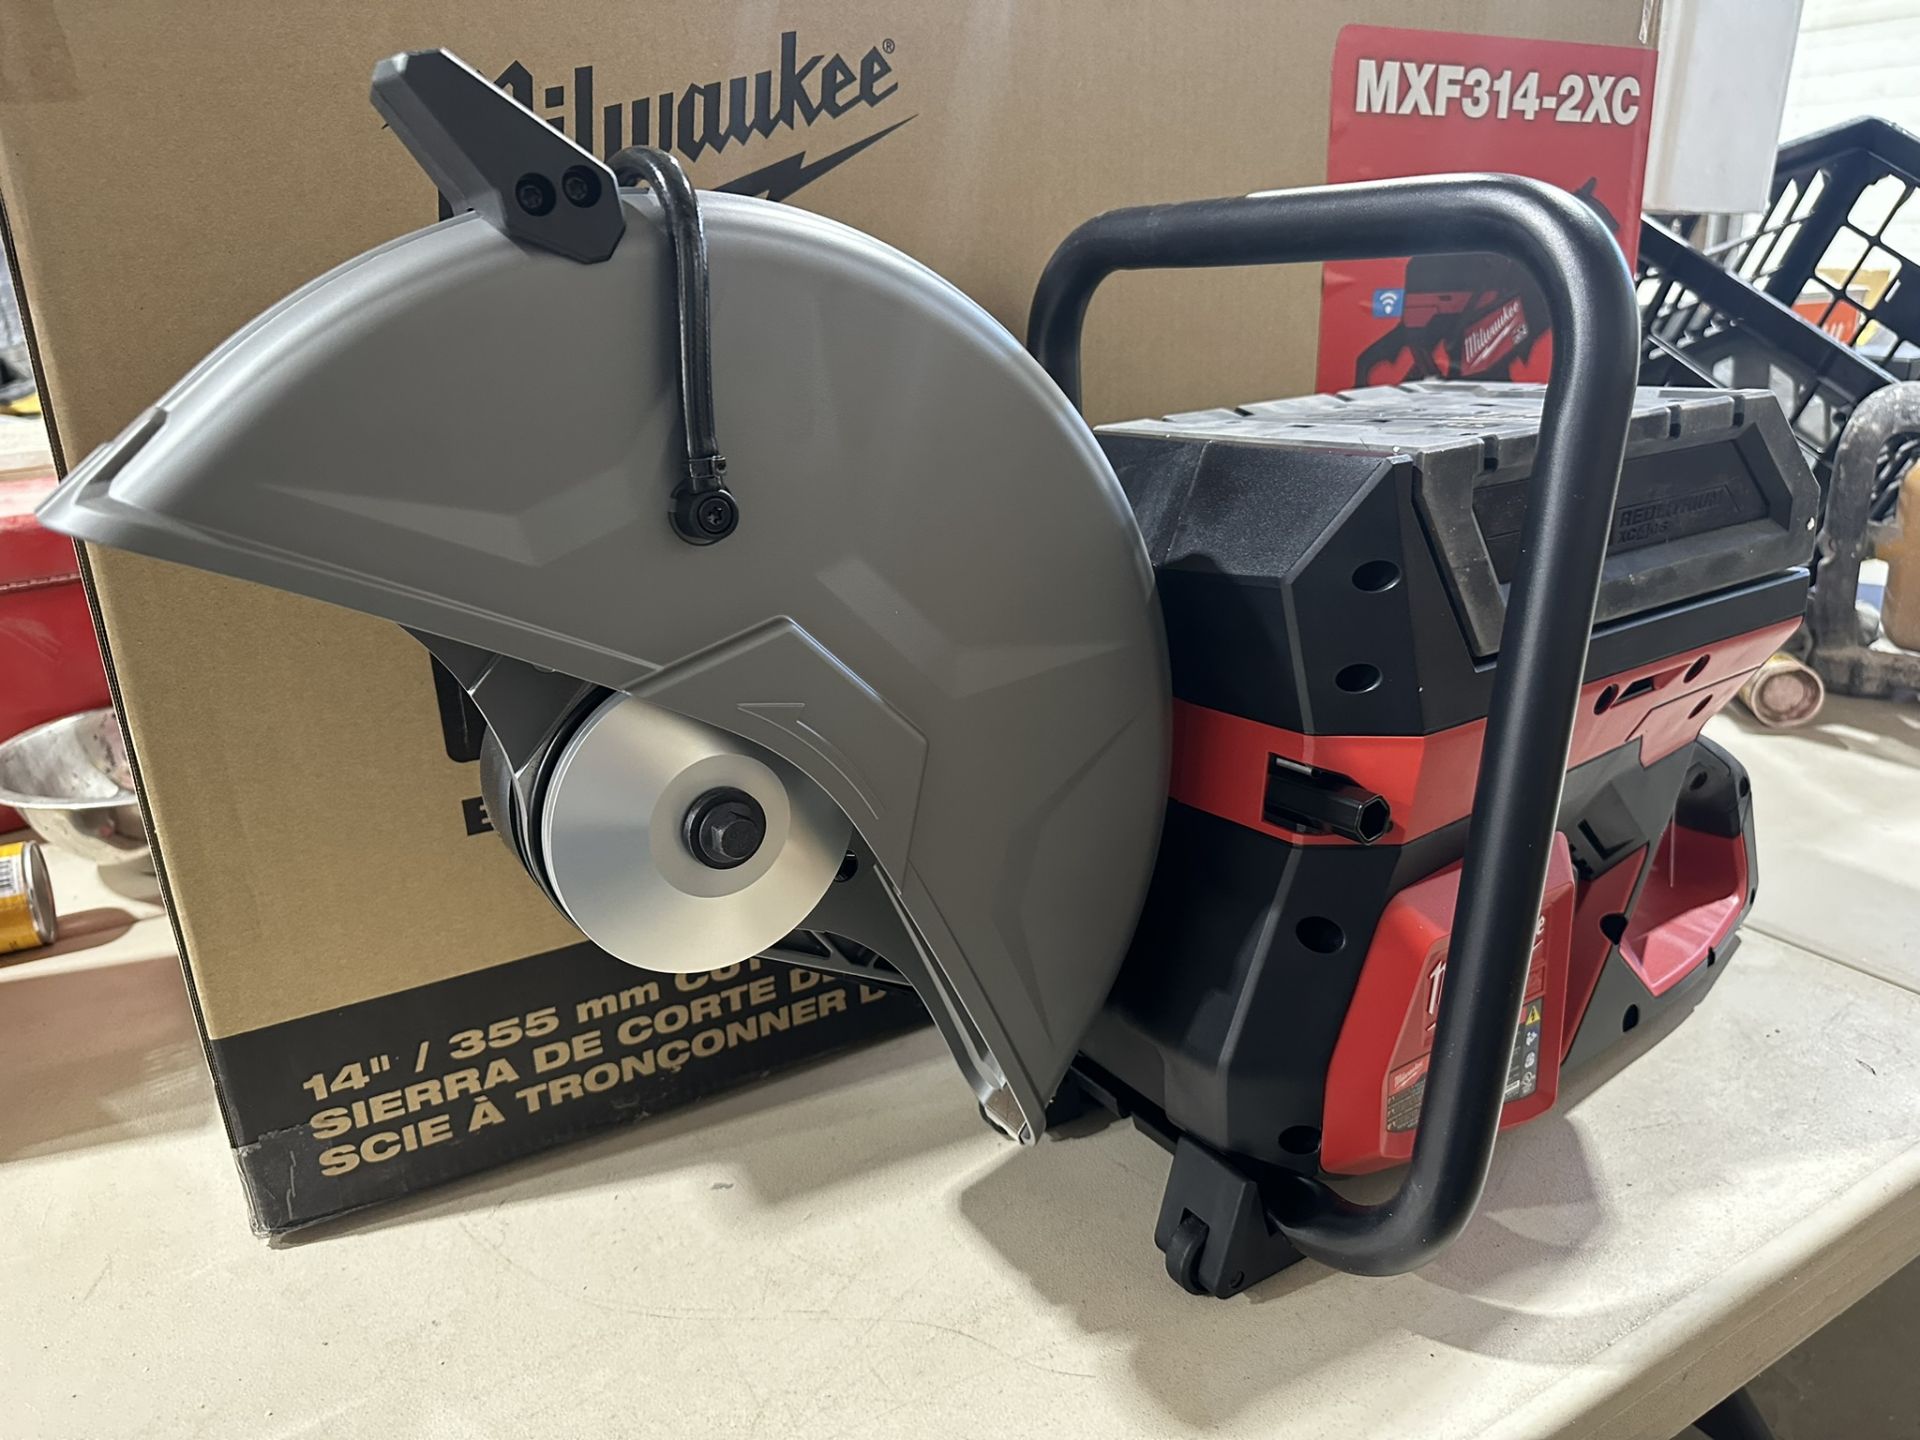 MILWAUKEE MXF314-2XC CORDLESS 14" DEMOLITION SAW W/ 2 XC406 BATTERIES AND CHARGER (NEW IN BOX) - Image 7 of 8